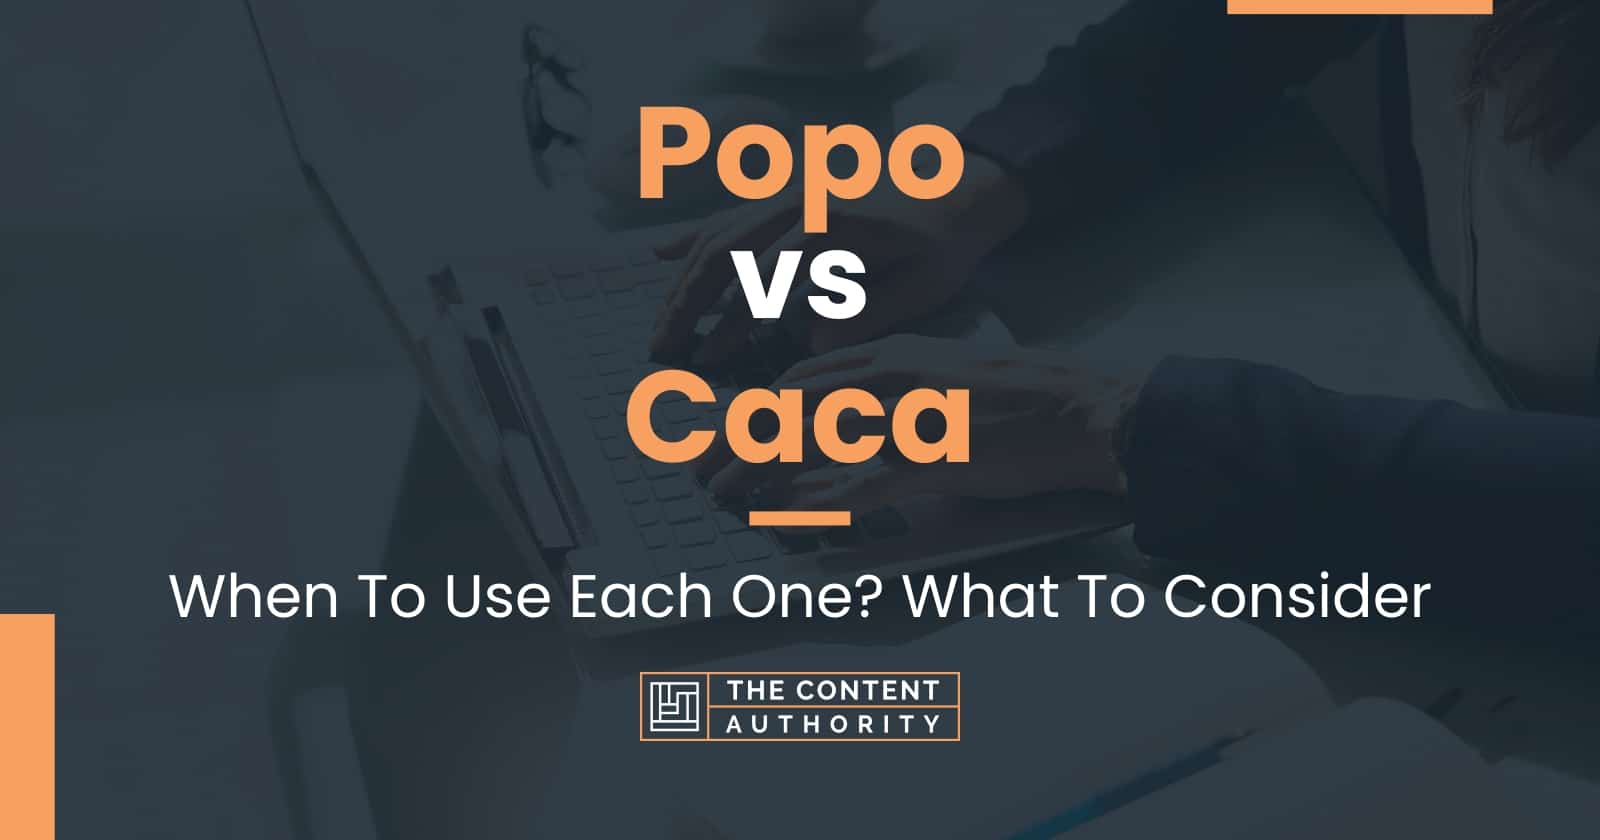 Popo vs Caca: When To Use Each One? What To Consider